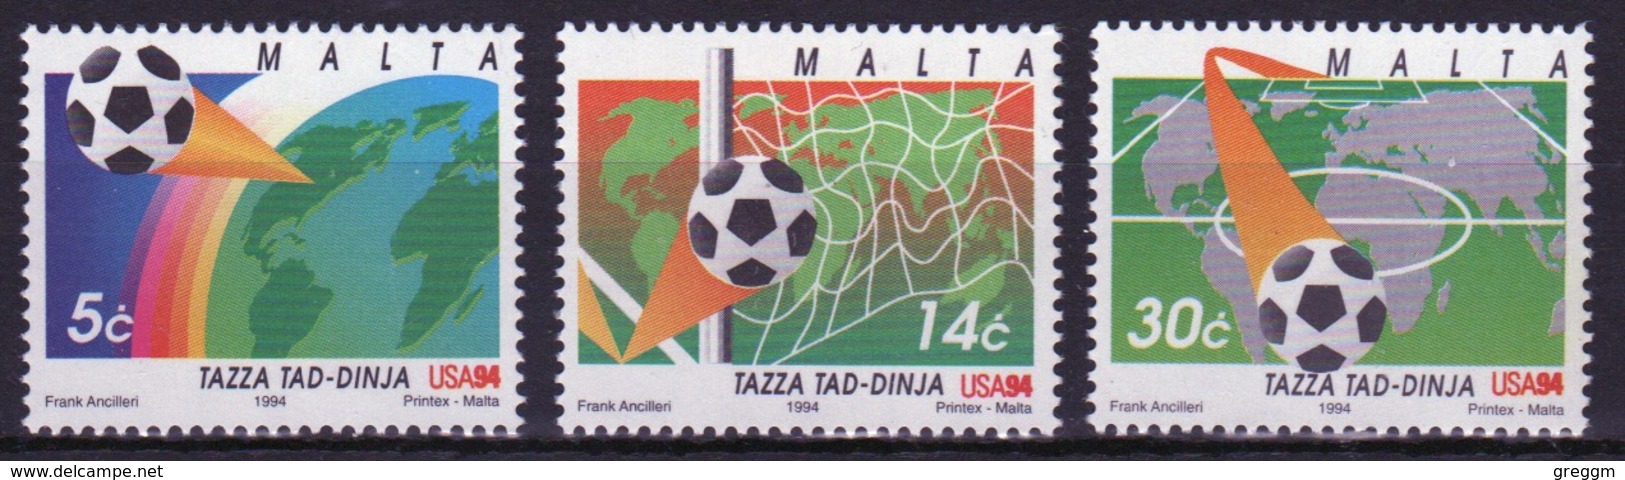 Malta 1994 Set Of Stamps To Celebrate World Cup Football. - Malta